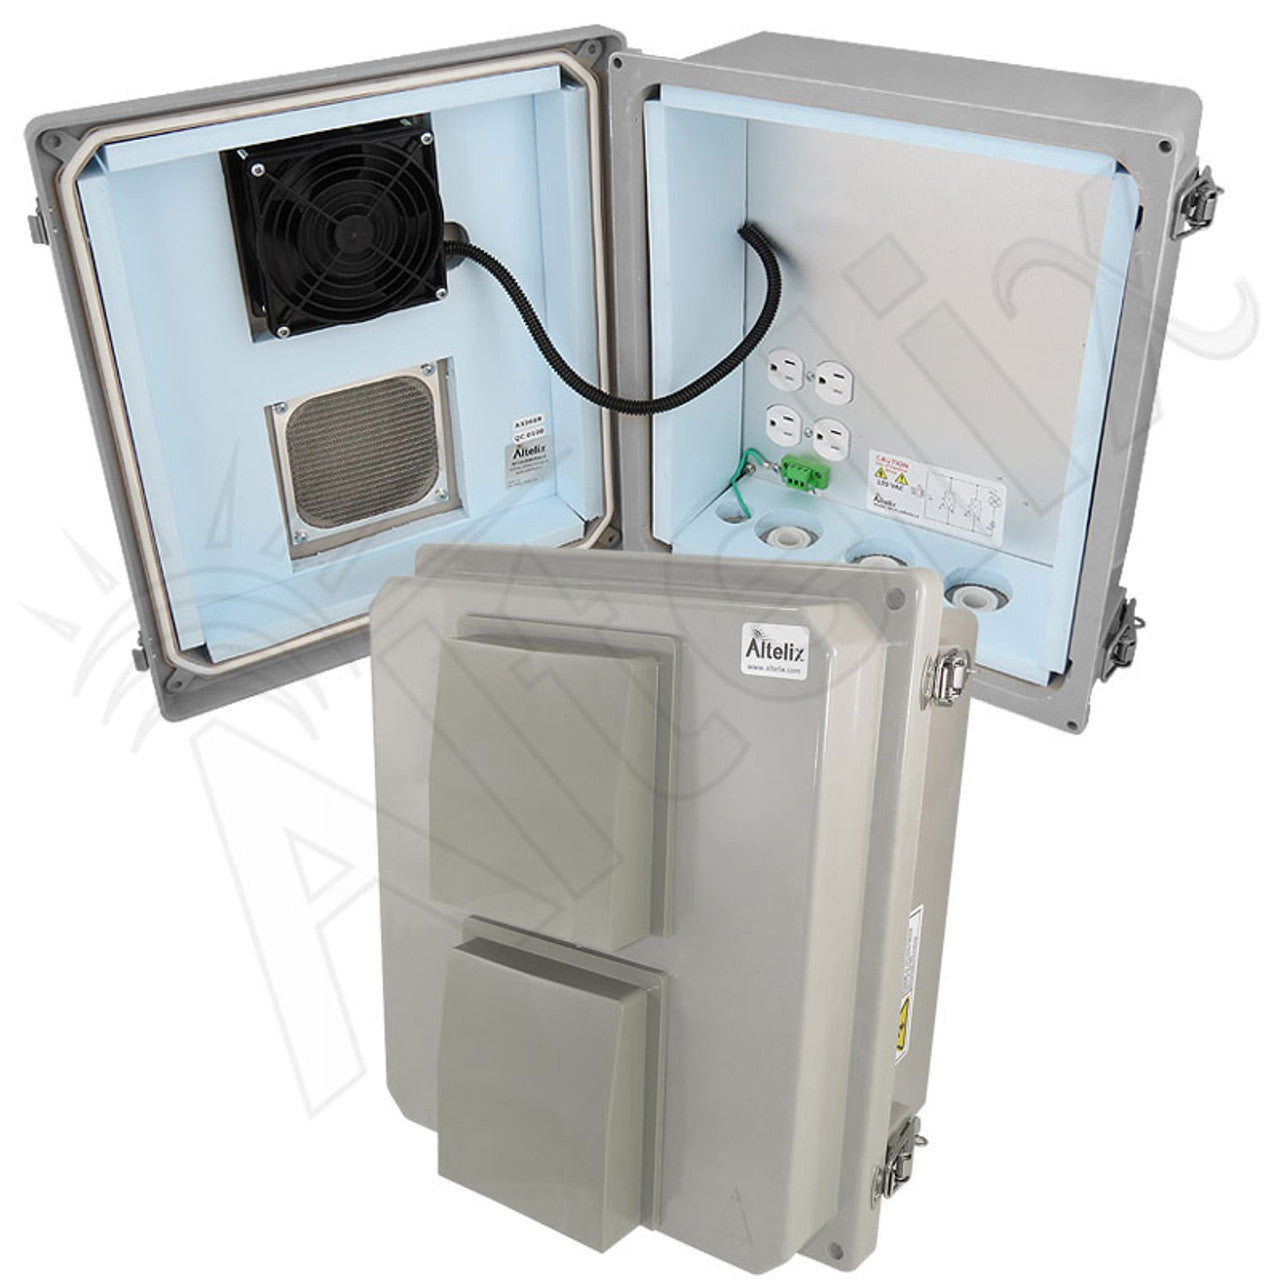 Altelix 14x12x8 Insulated Fiberglass Vented Weatherproof NEMA Enclosure with Cooling Fan, 120 VAC Outlets & Power Cord-1